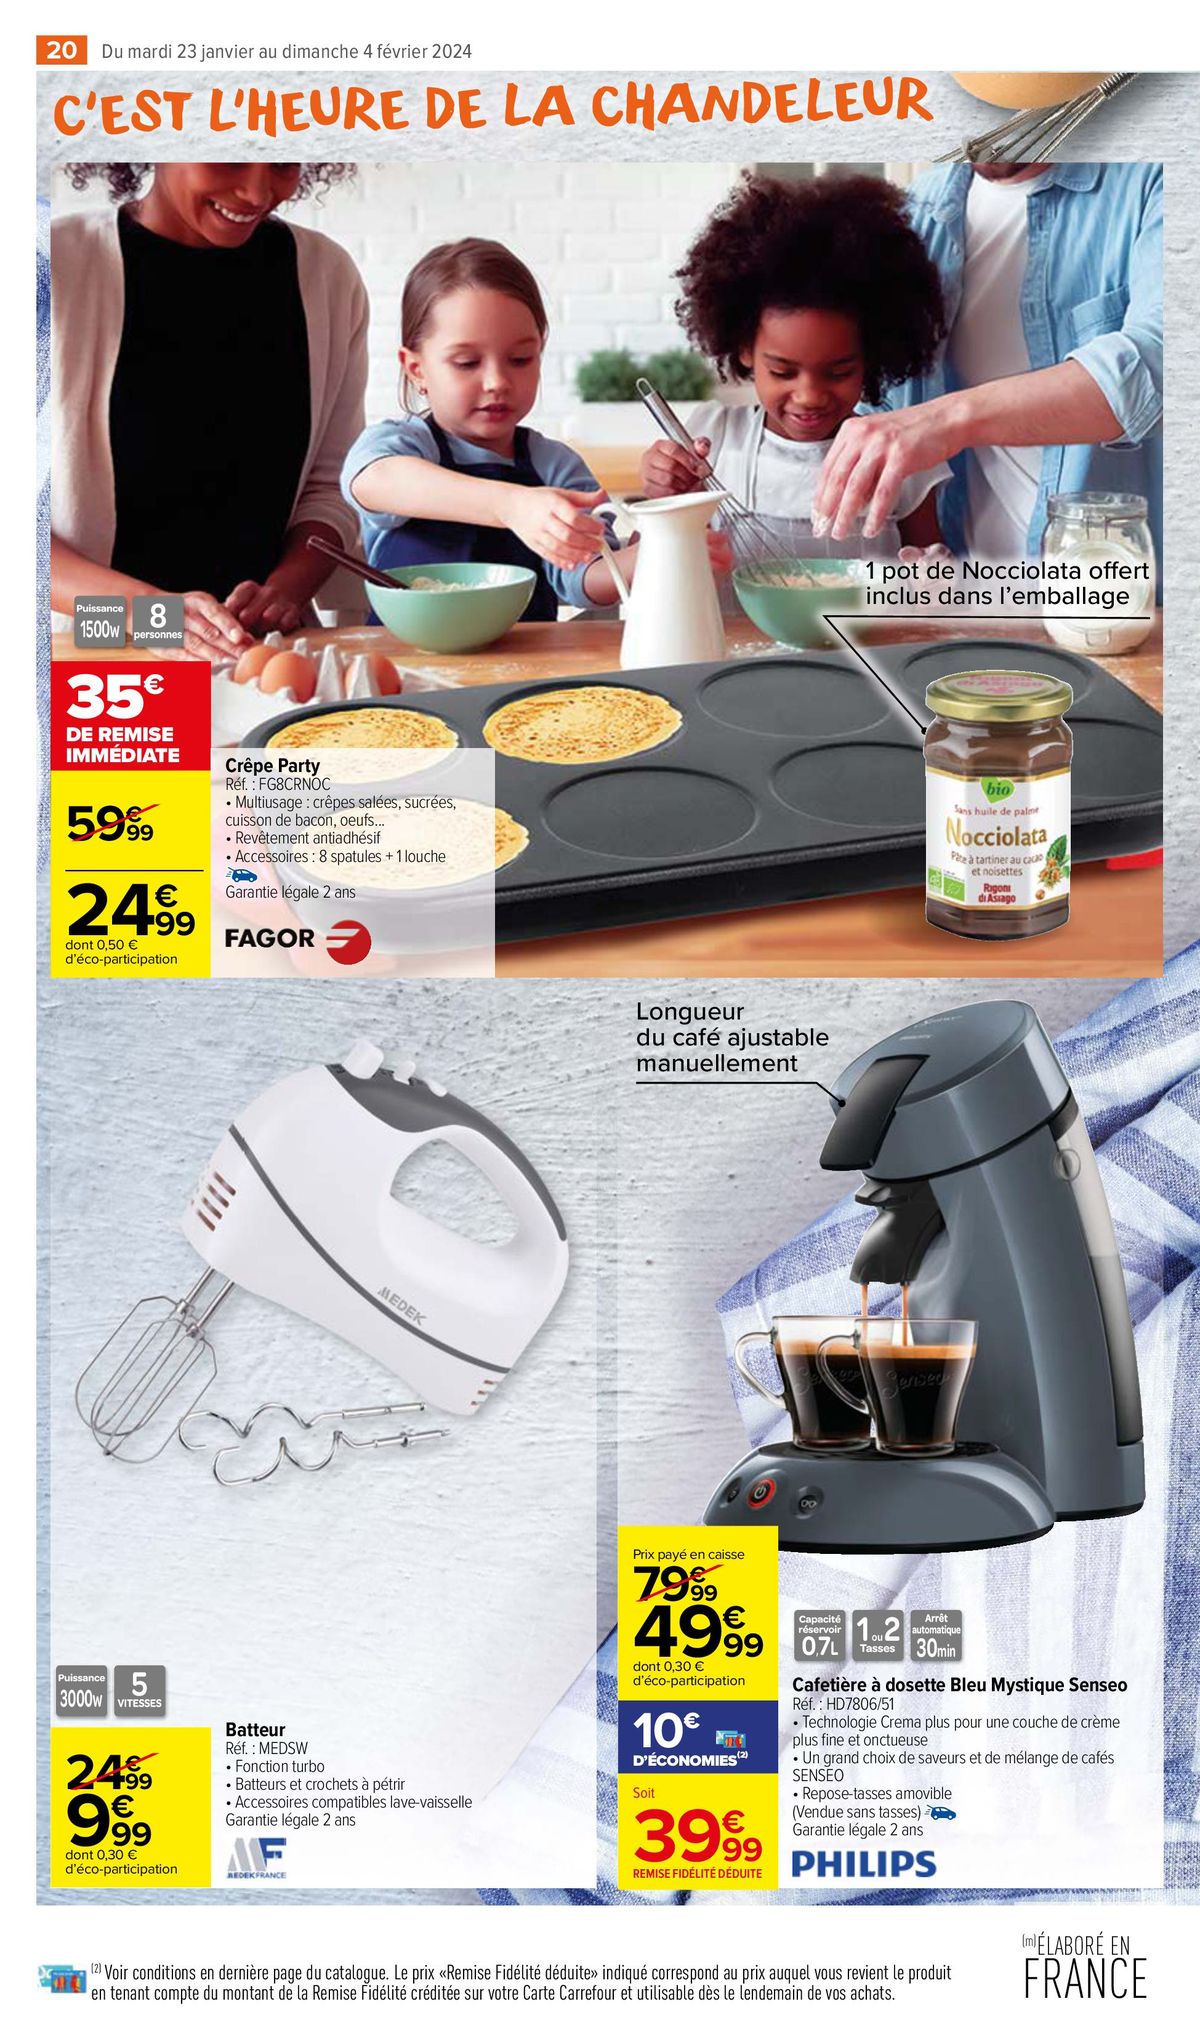 Catalogue Crêpes Party !, page 00022